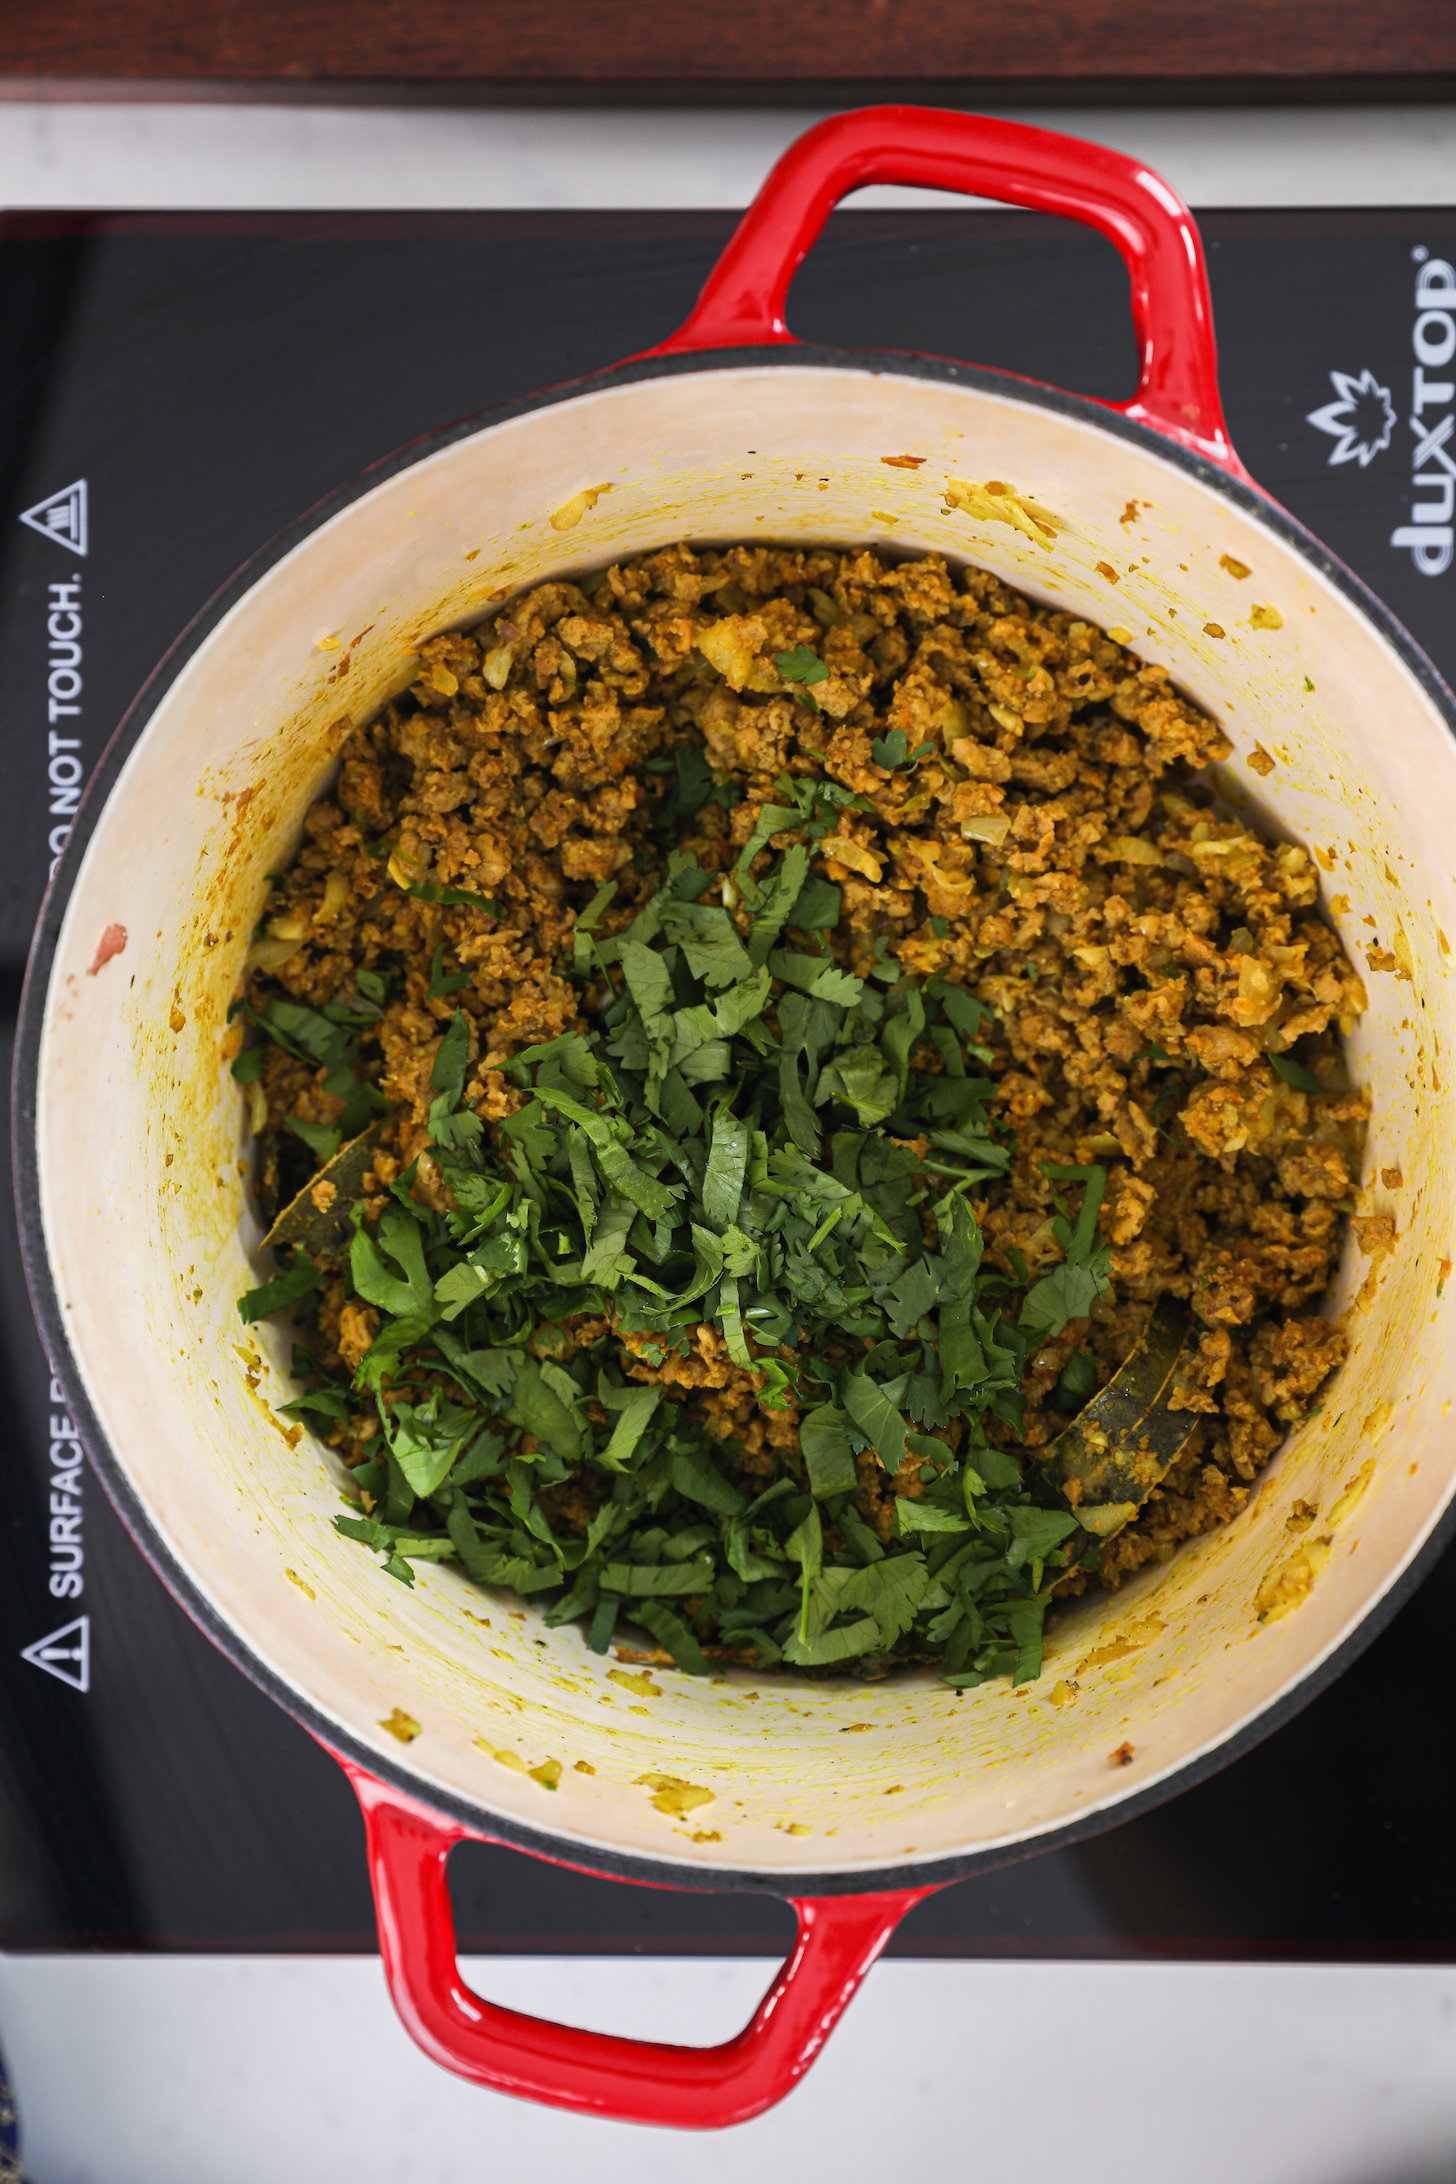 A pot of minced chicken topped with cilantro on a mobile cooktop.